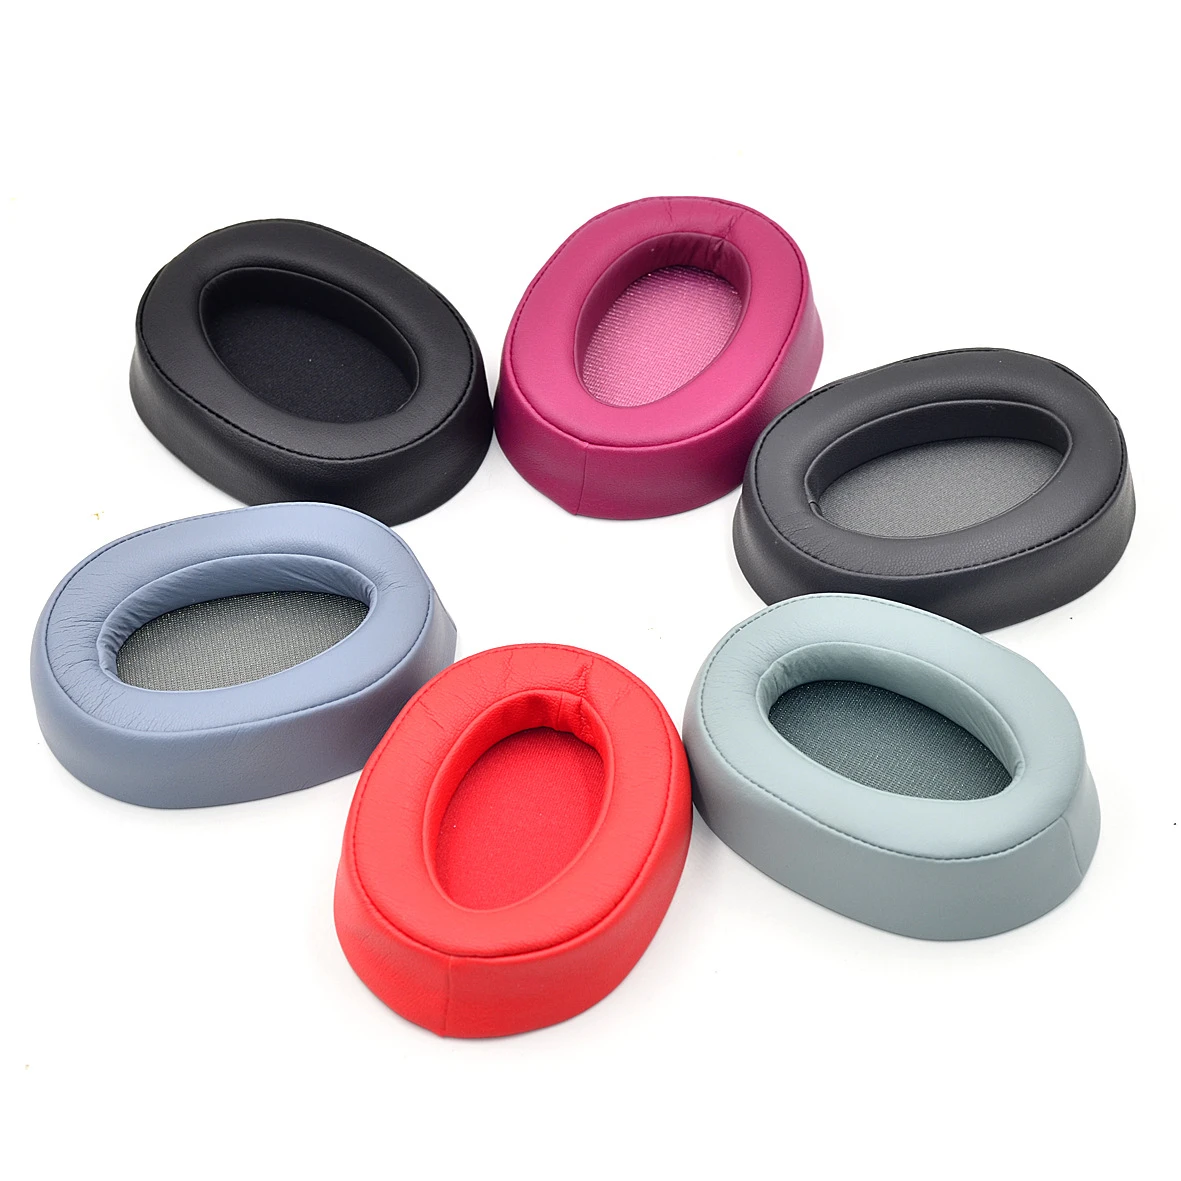 Replacement Earpads Ear Pad For Sony MDR 100ABN MDR-100ABN WH H900N WH-H900N Headphone Cushion Cups Ear Cover Earpad